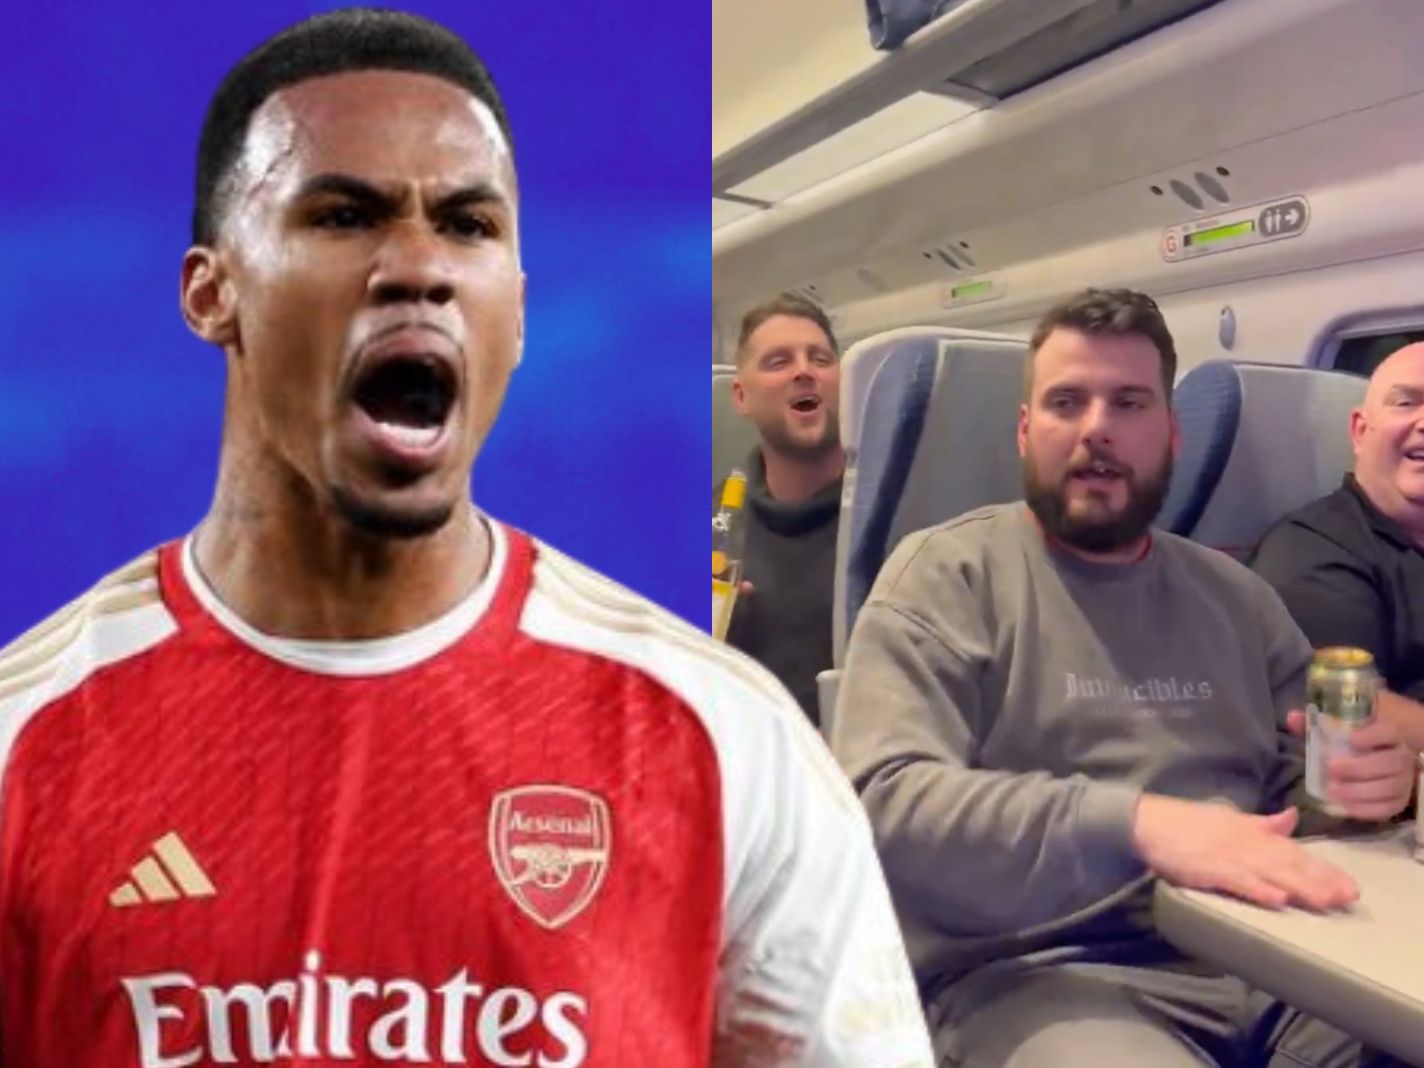 King of Brazil: Arsenal Fans Unveil EPIC New Gabriel Magalhaes Chant Before Porto Game